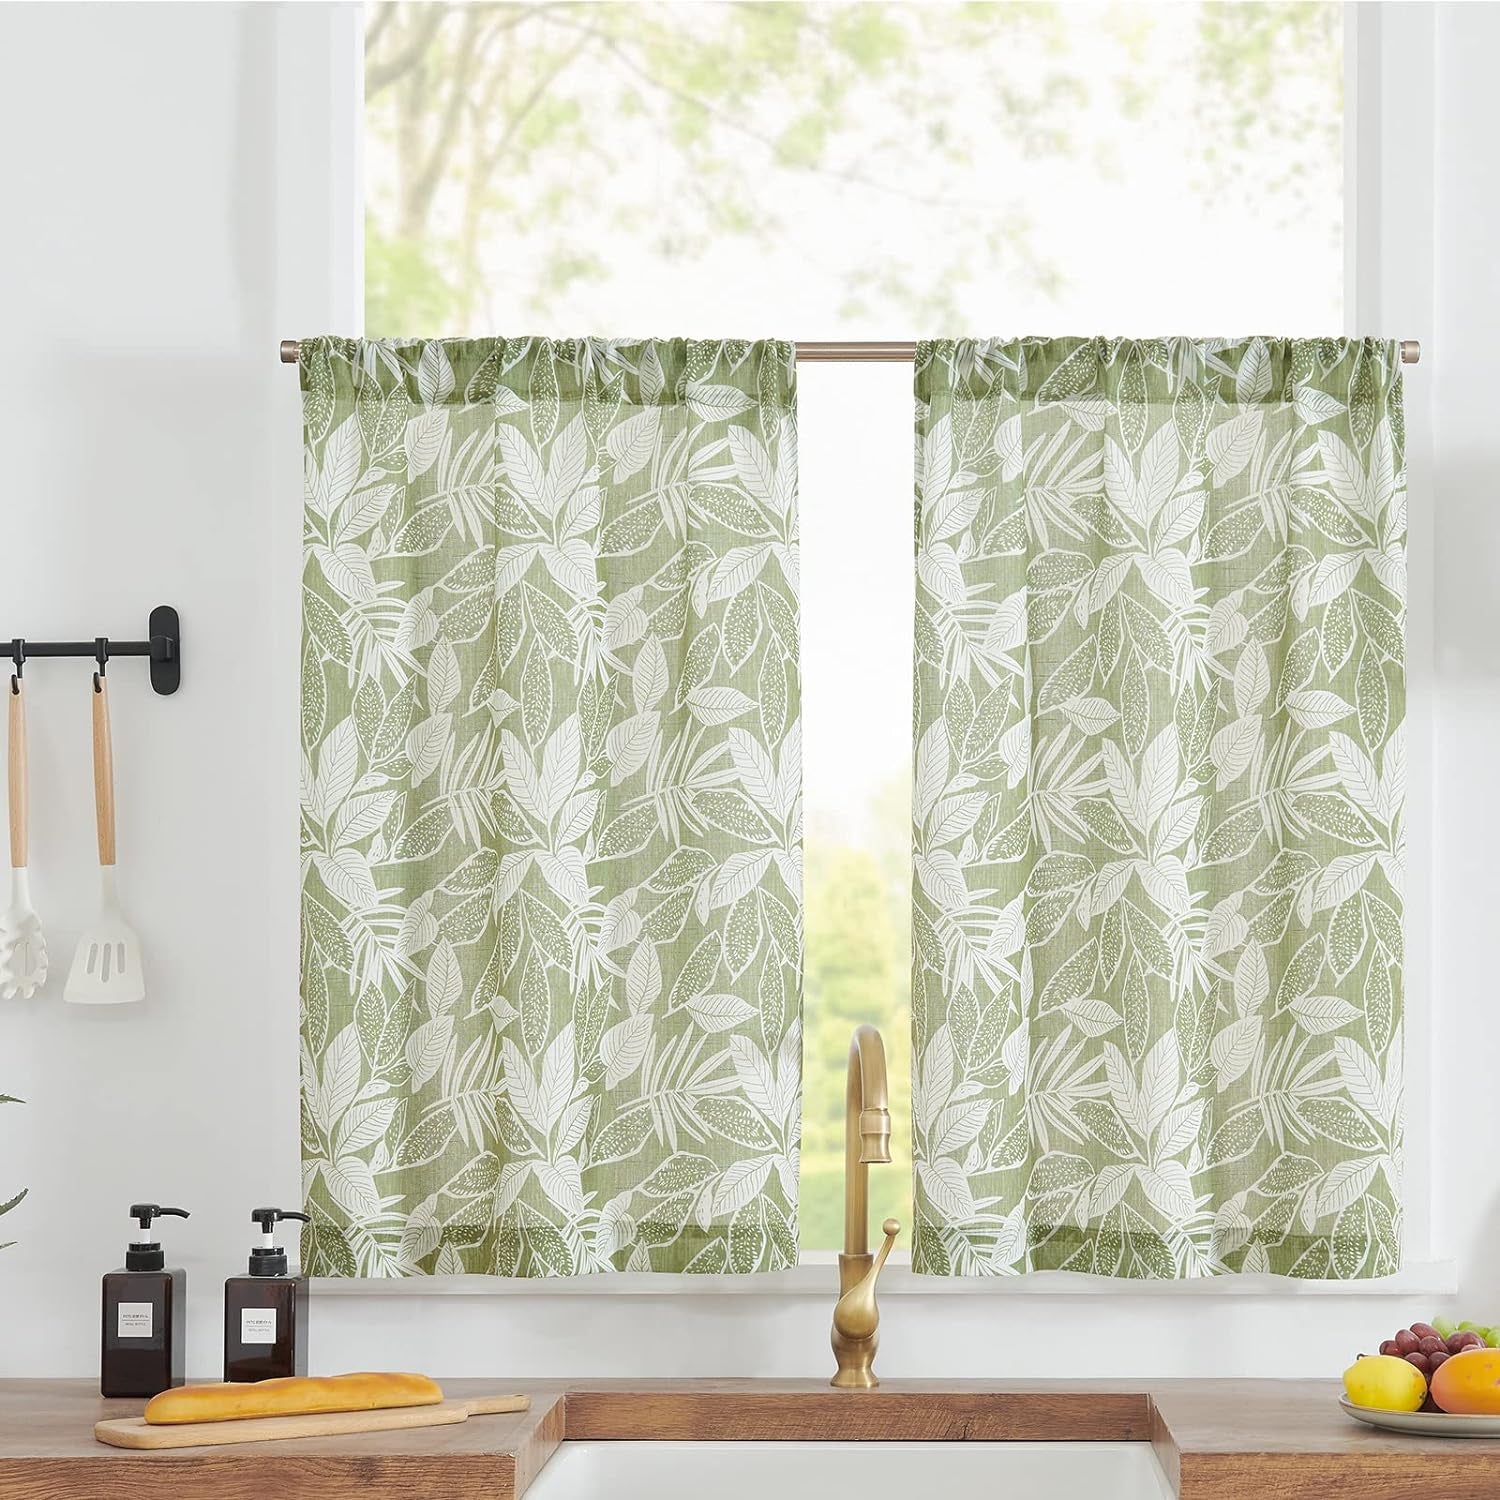 Jinchan Beige Kitchen Curtains Linen Tier Curtains 24 Inch Farmhouse Cafe Curtains Light Filtering Small Window Curtains Flax Country Rustic Rod Pocket Bathroom Laundry Room RV 2 Panels Crude  CKNY HOME FASHION Leaf Sage Green On White 24L 